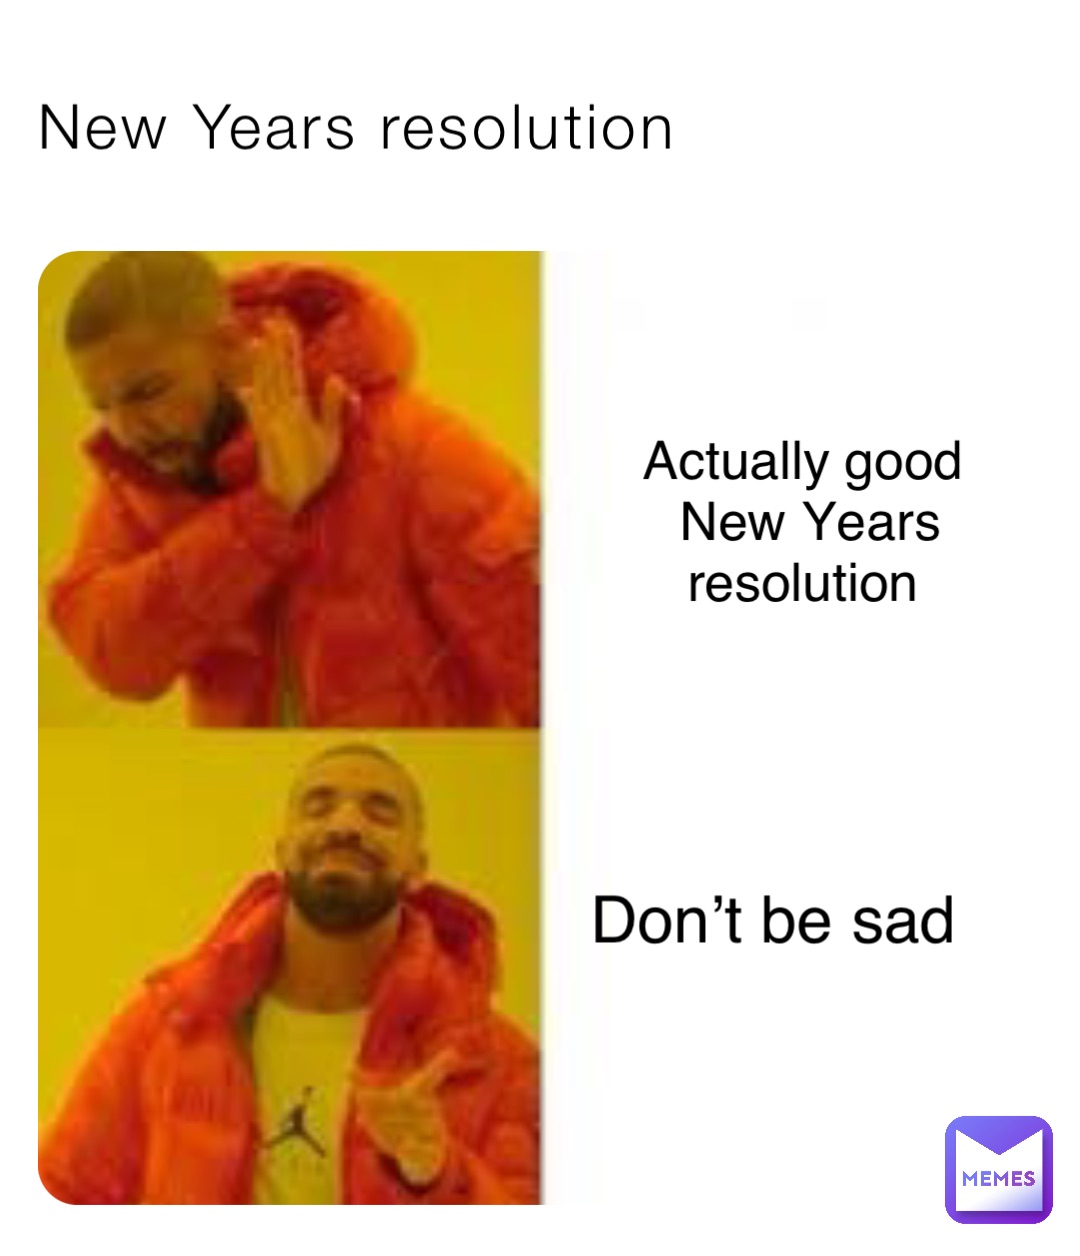 Actually good New Years resolution New Years resolution Don’t be sad